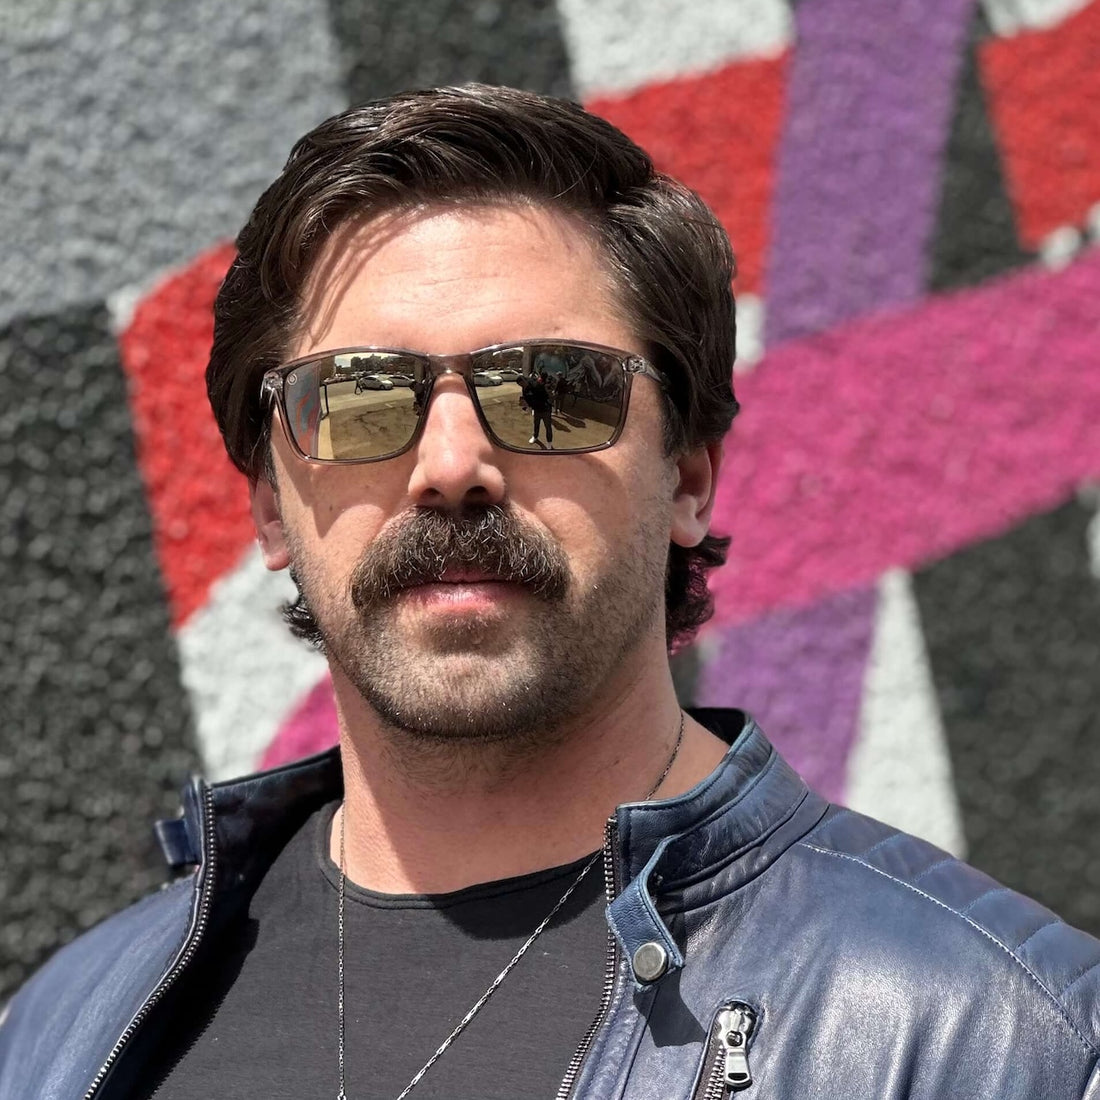 A man with a mustache wearing Murphy shades stands confidently in front of a vibrant graffiti wall.